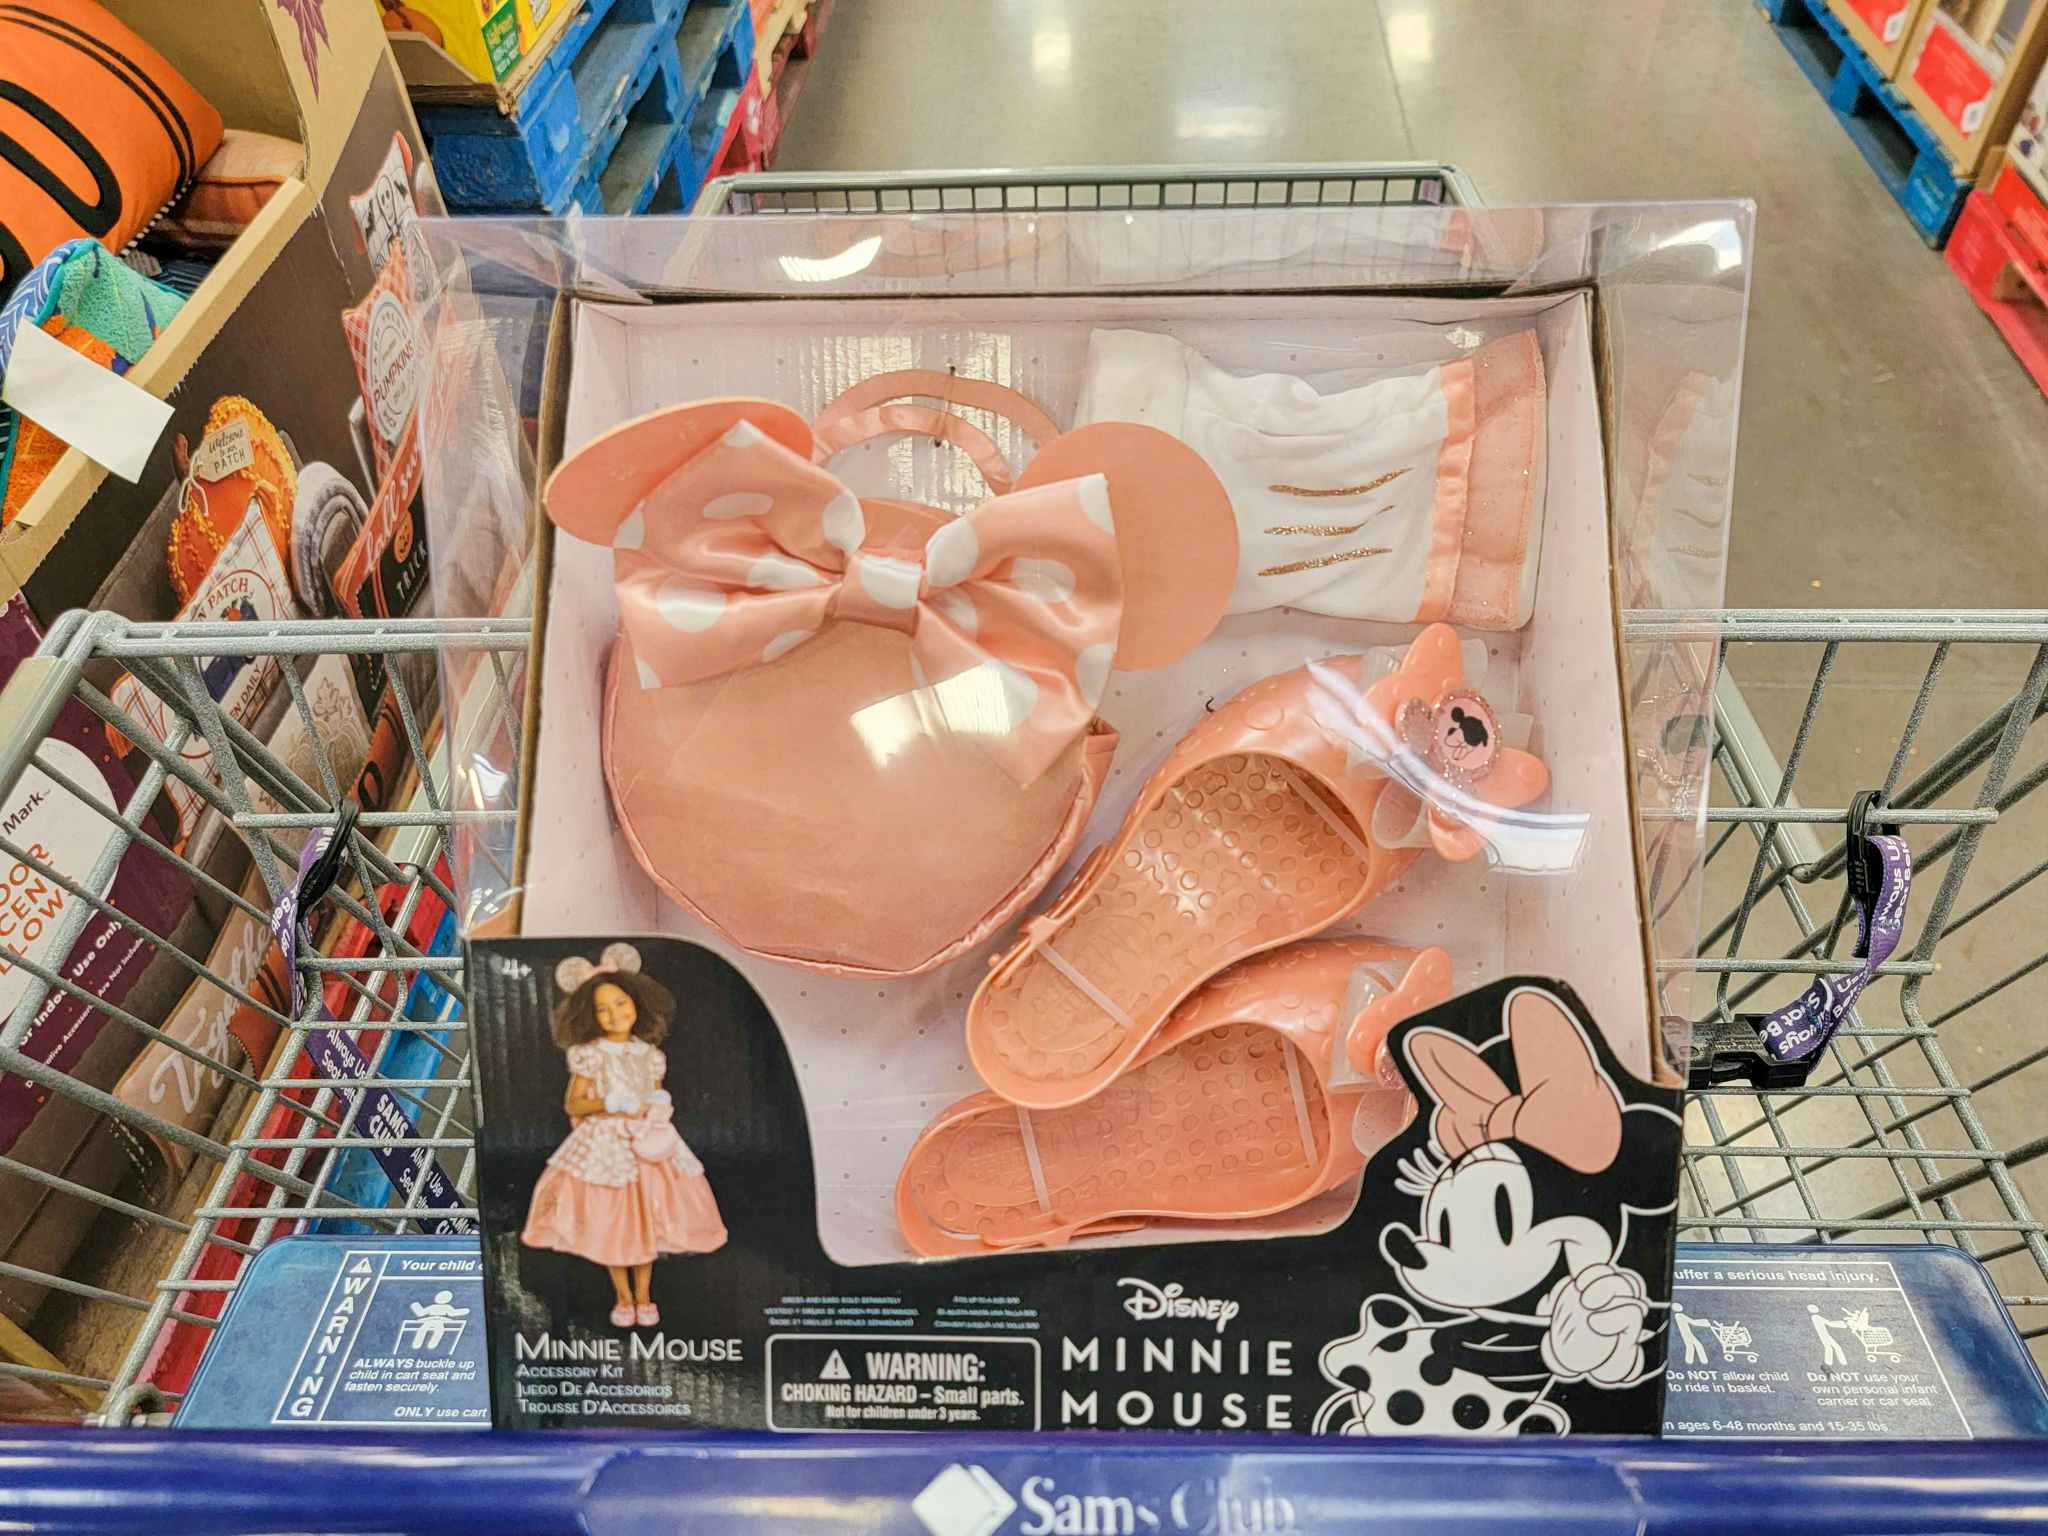 minnie mouse accessory sets in a cart